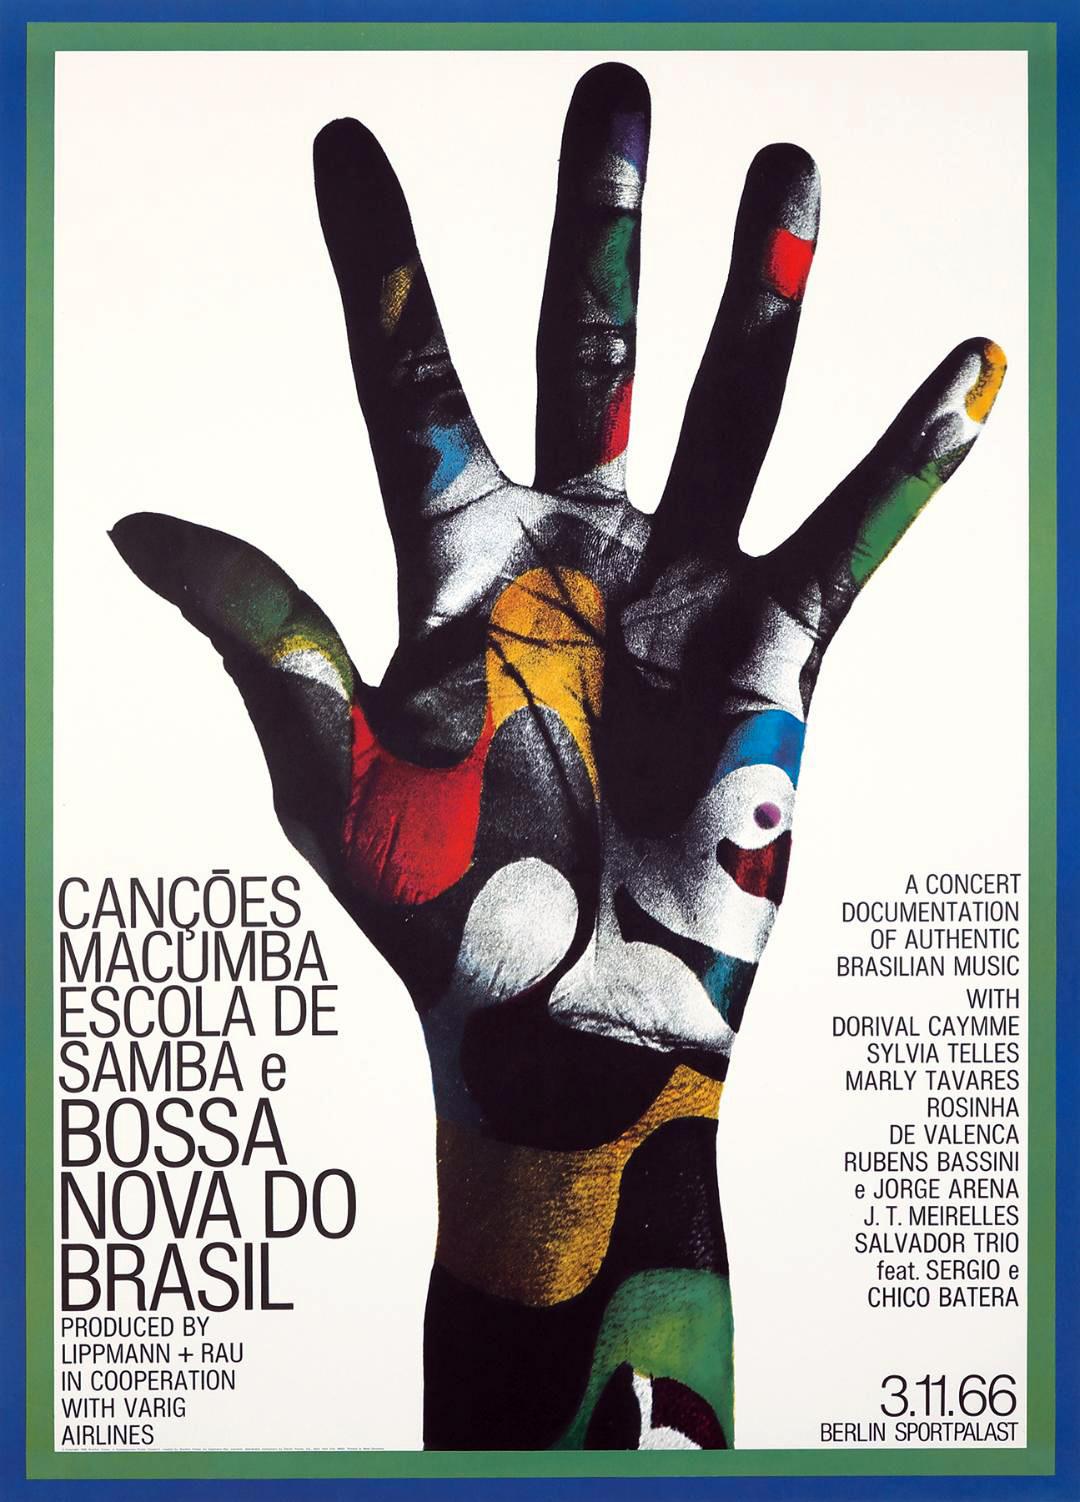 Bossa Nova do Brasil by Gunther Kieser
Keiser's extraordinary posters are the result of creating images from solid forms, like sculpture or collage, which he then photographs. A great music lover, he was fortunate to become associated with